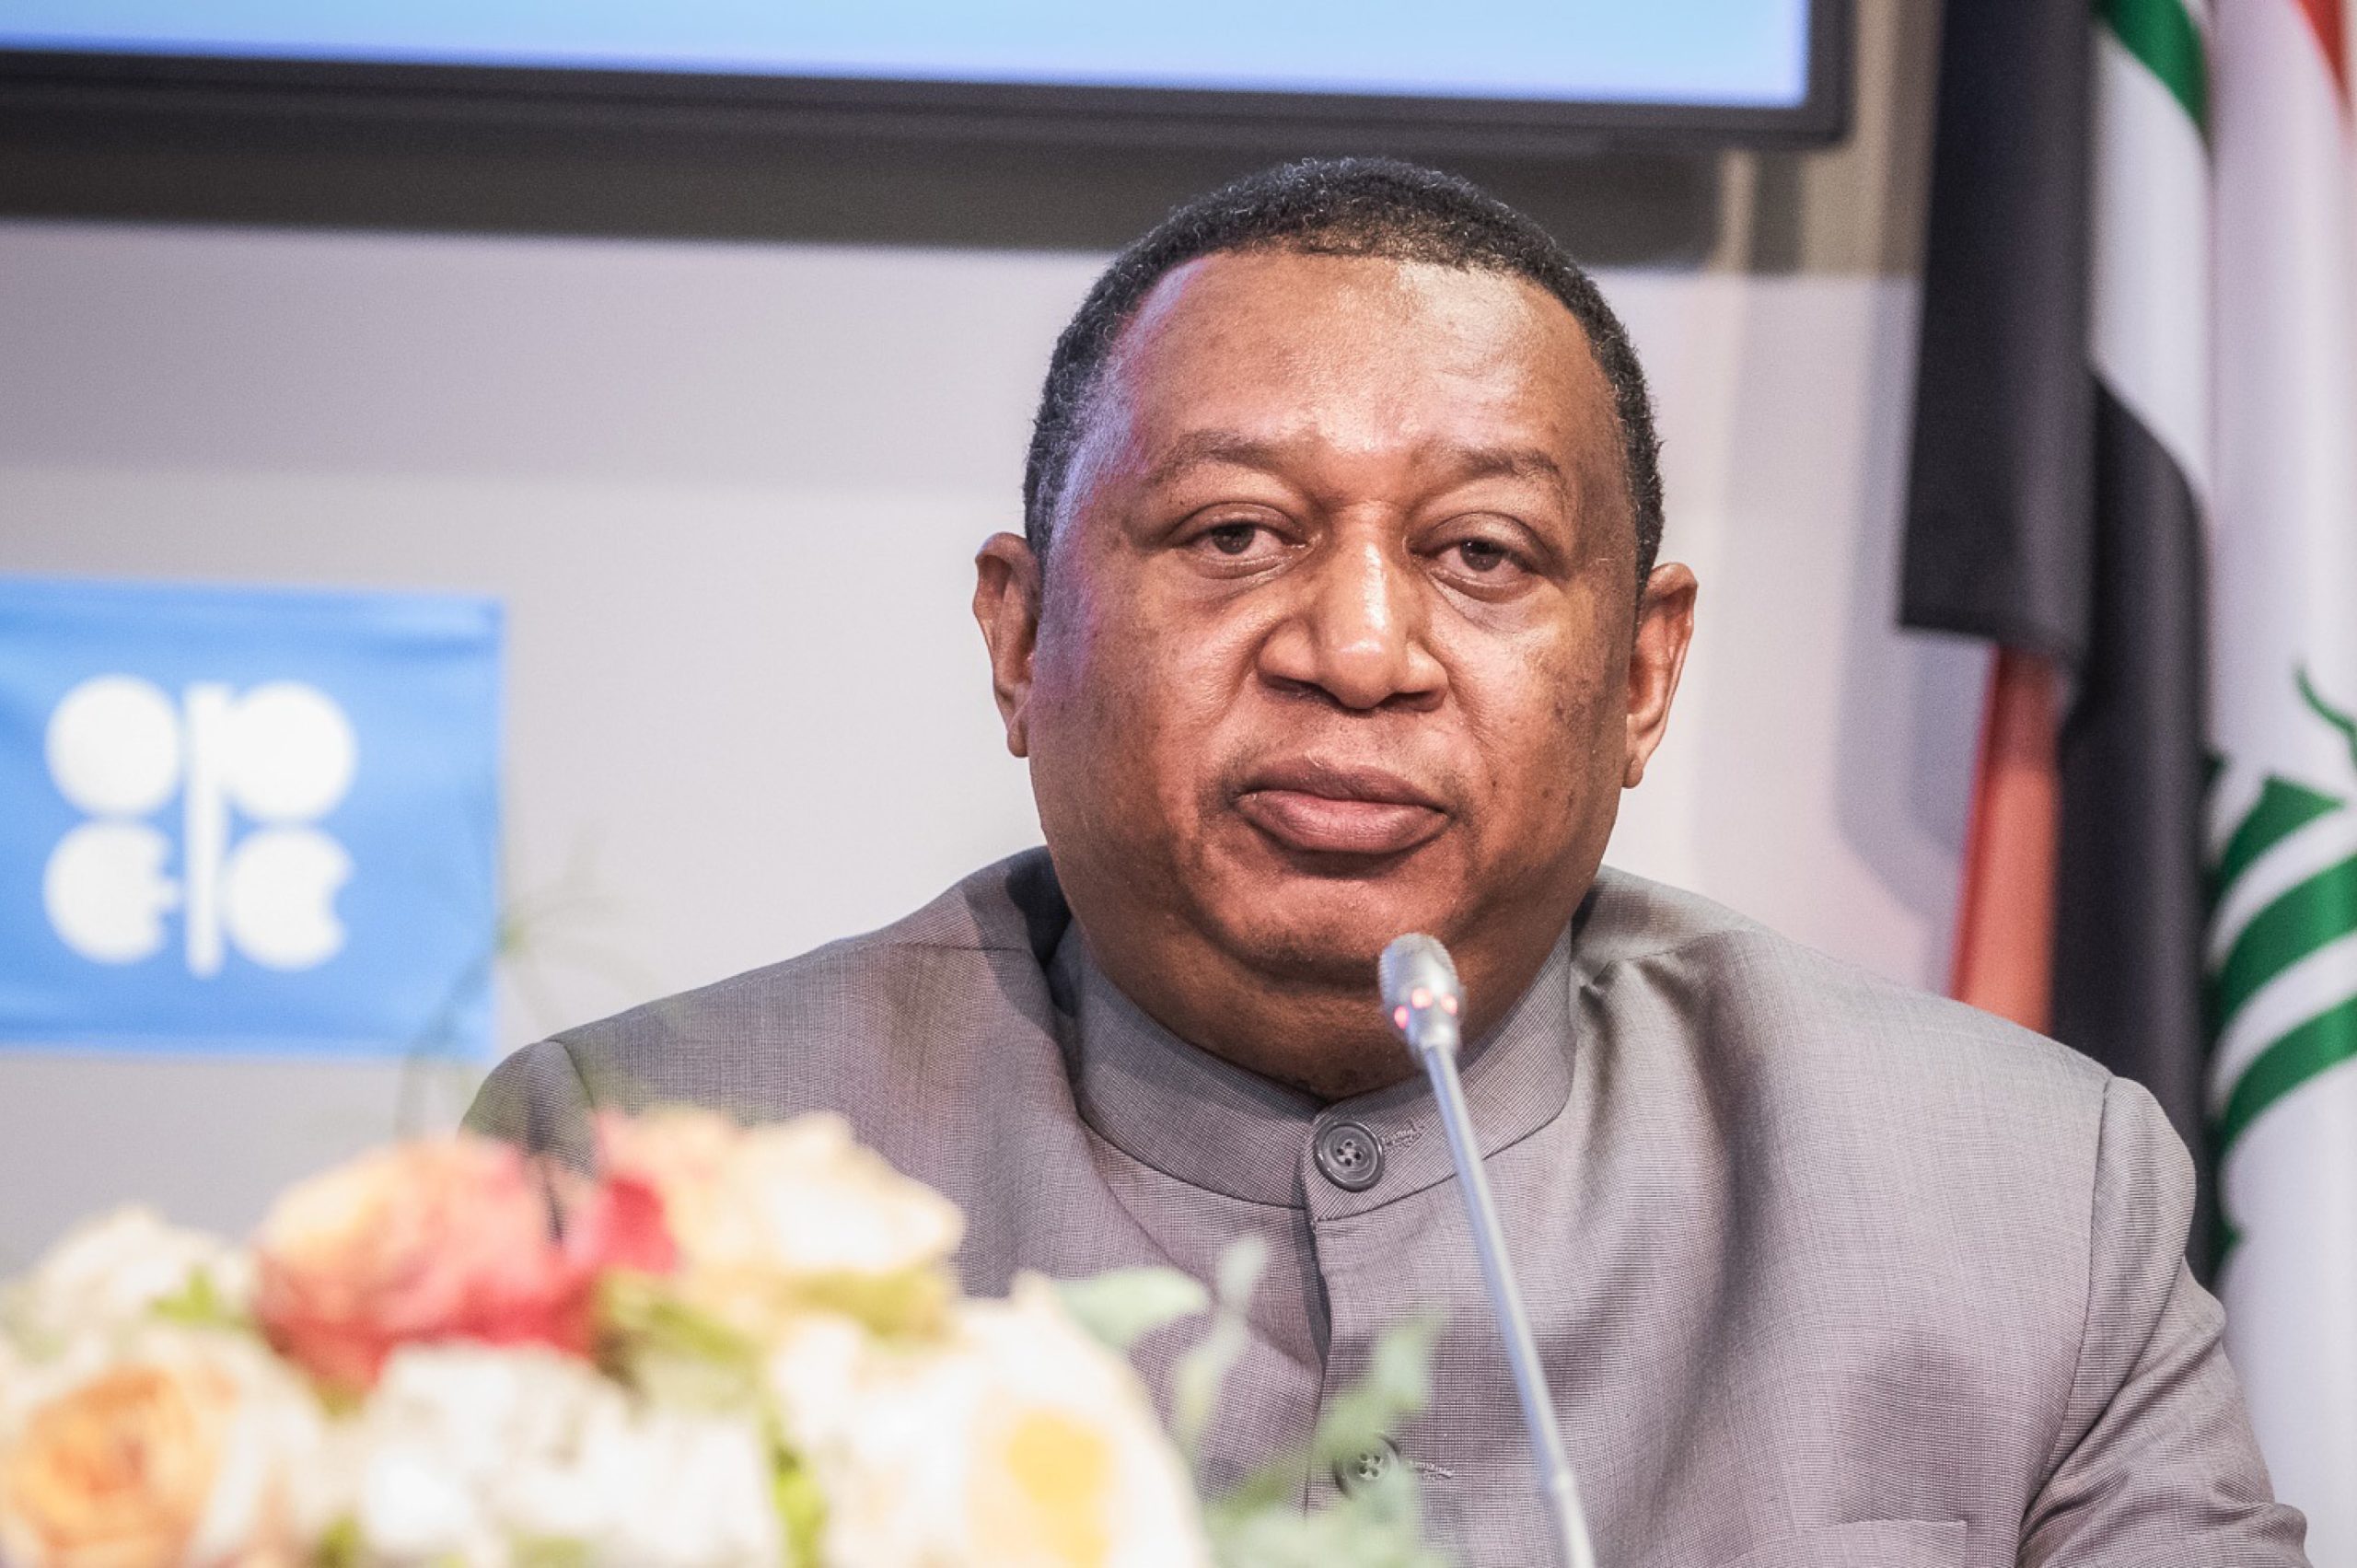 A Major Blow to the Global Energy Community Following the Loss of OPEC Secretary General Mohammad Barkindo